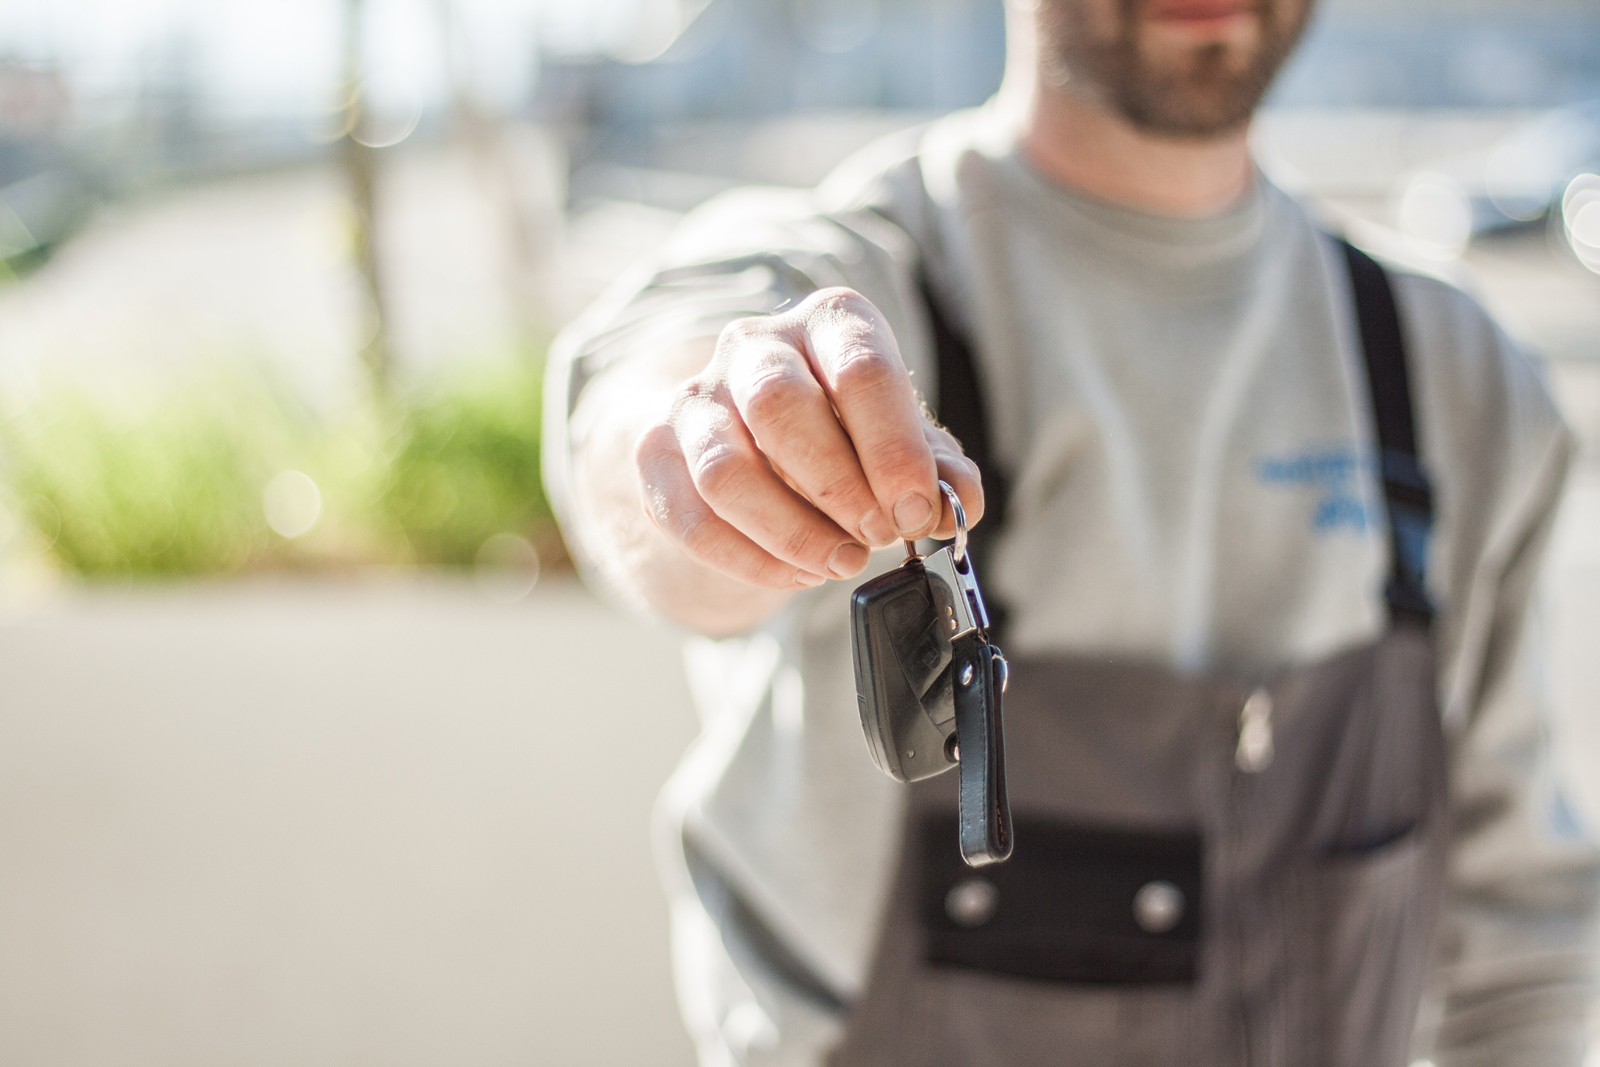 A mechanic handing a key back to the vehicle owner